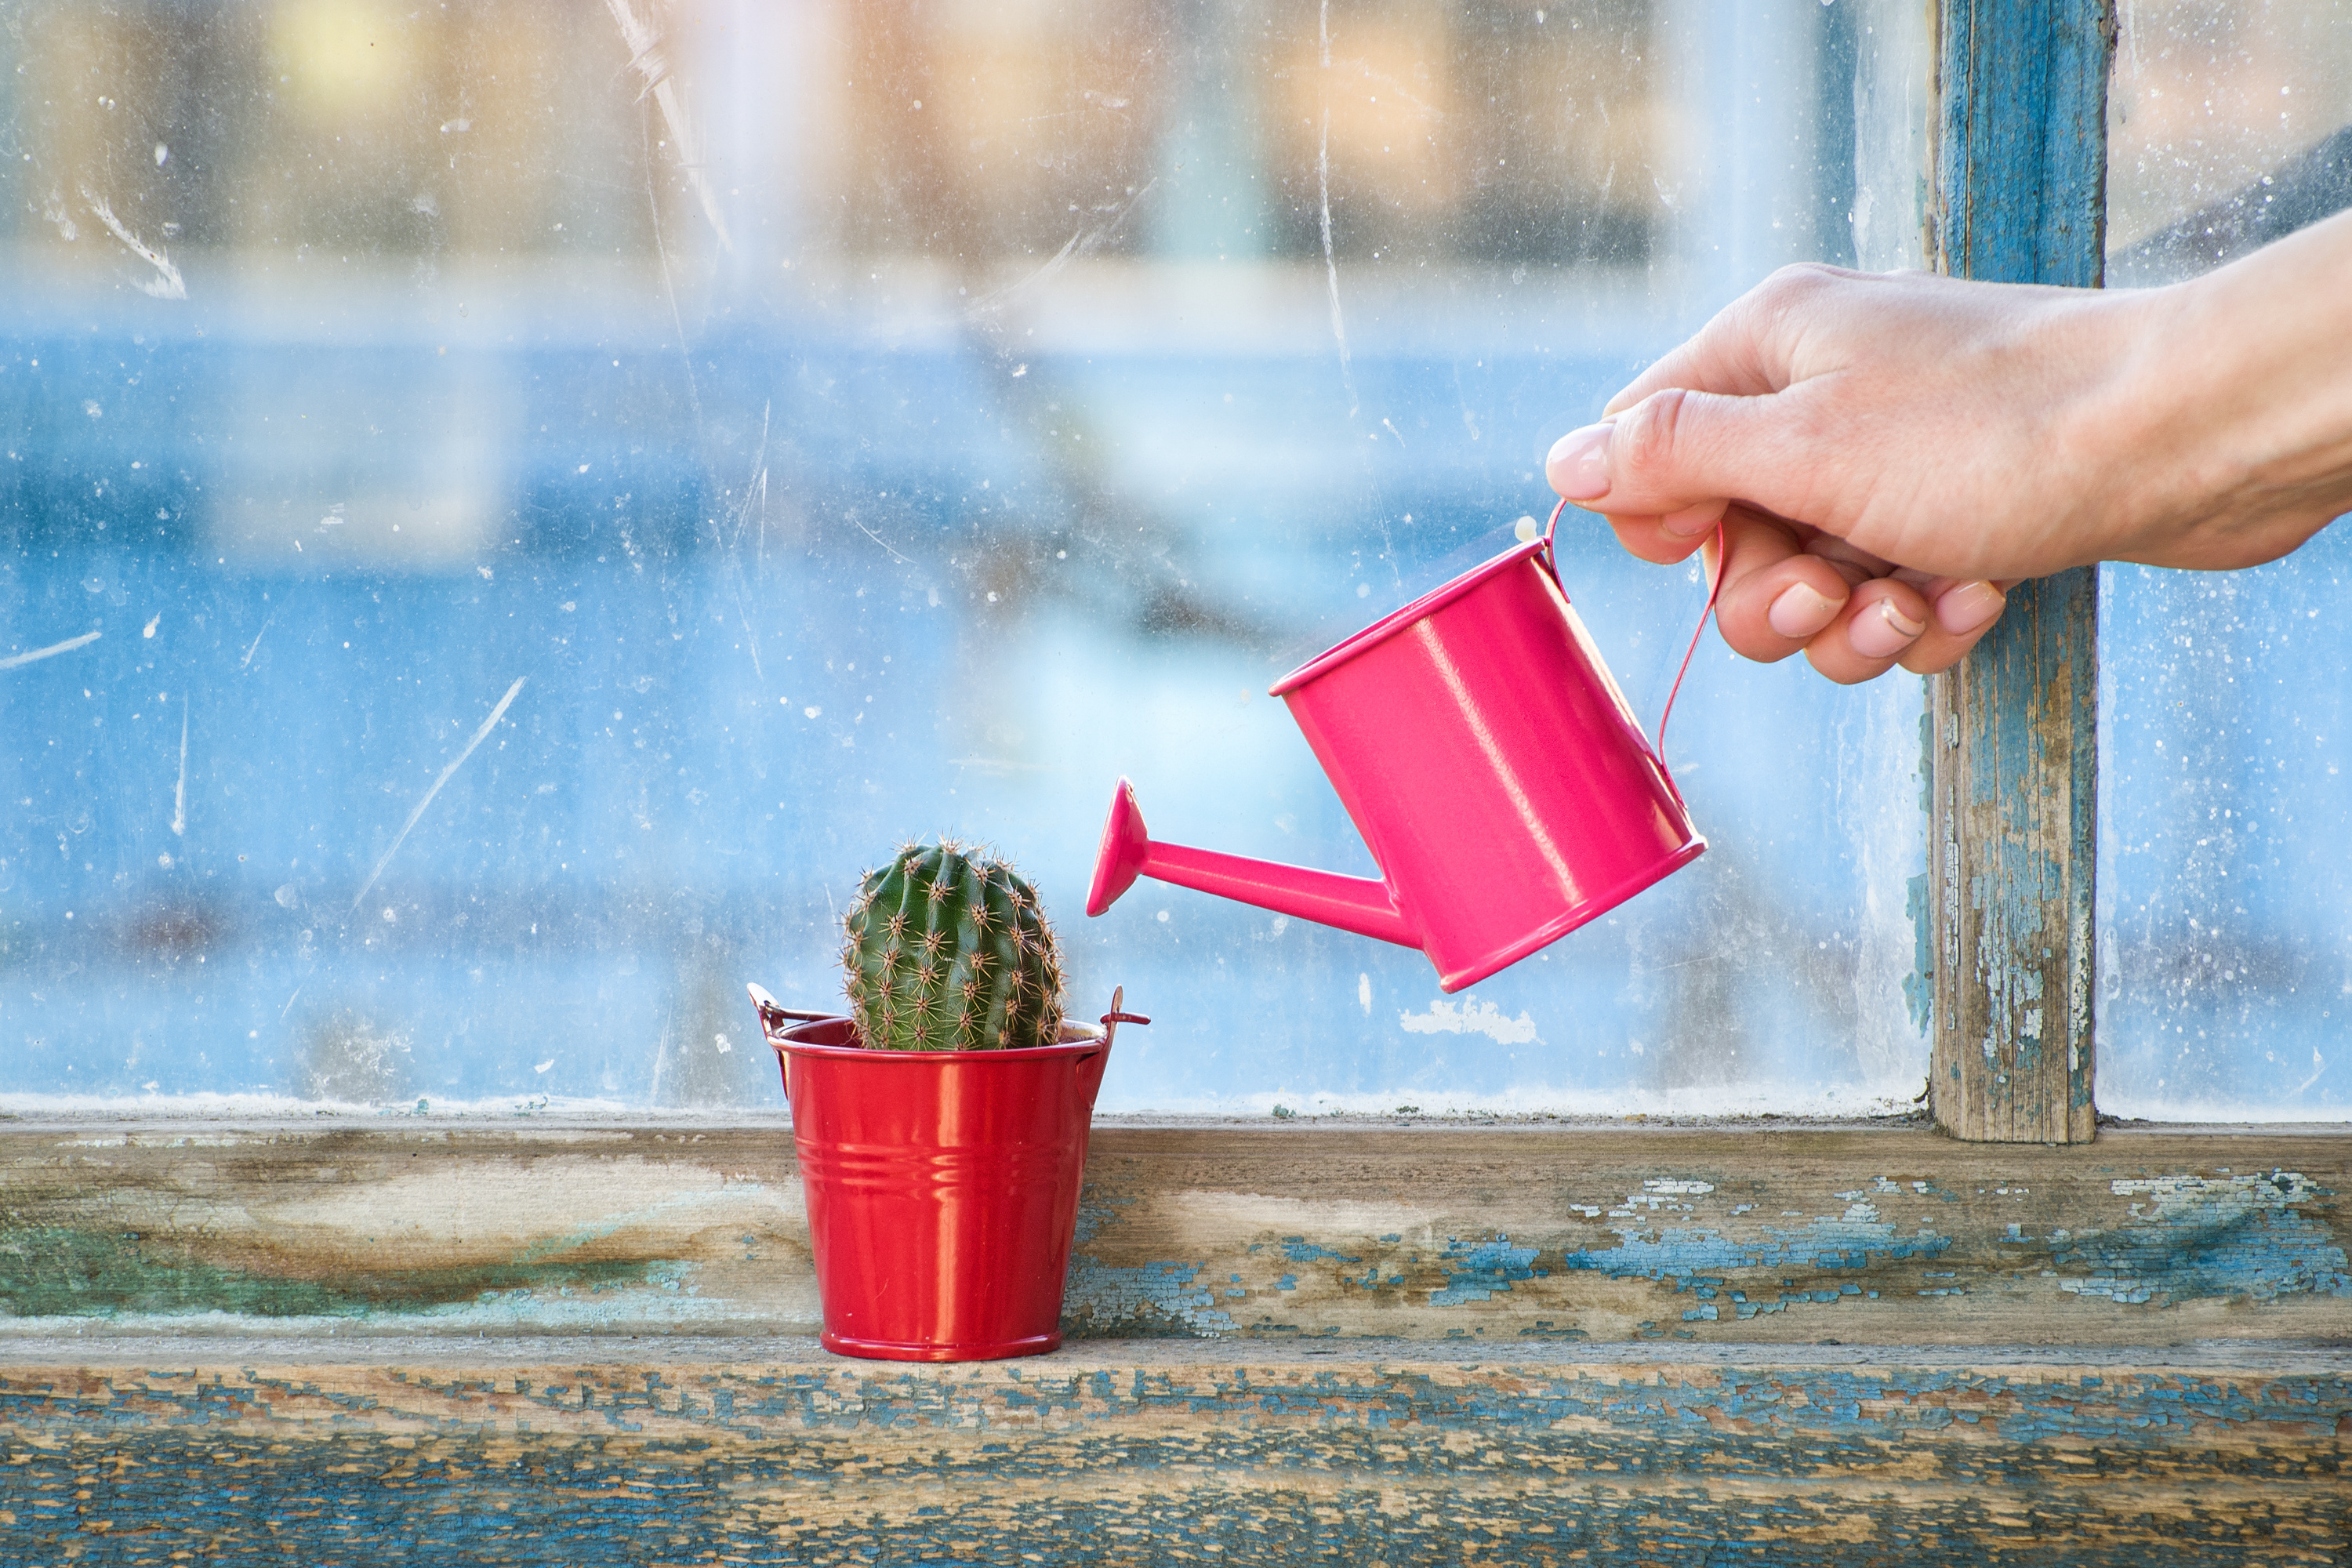 Small pink watering can in a female hand watering a cactus on an old window